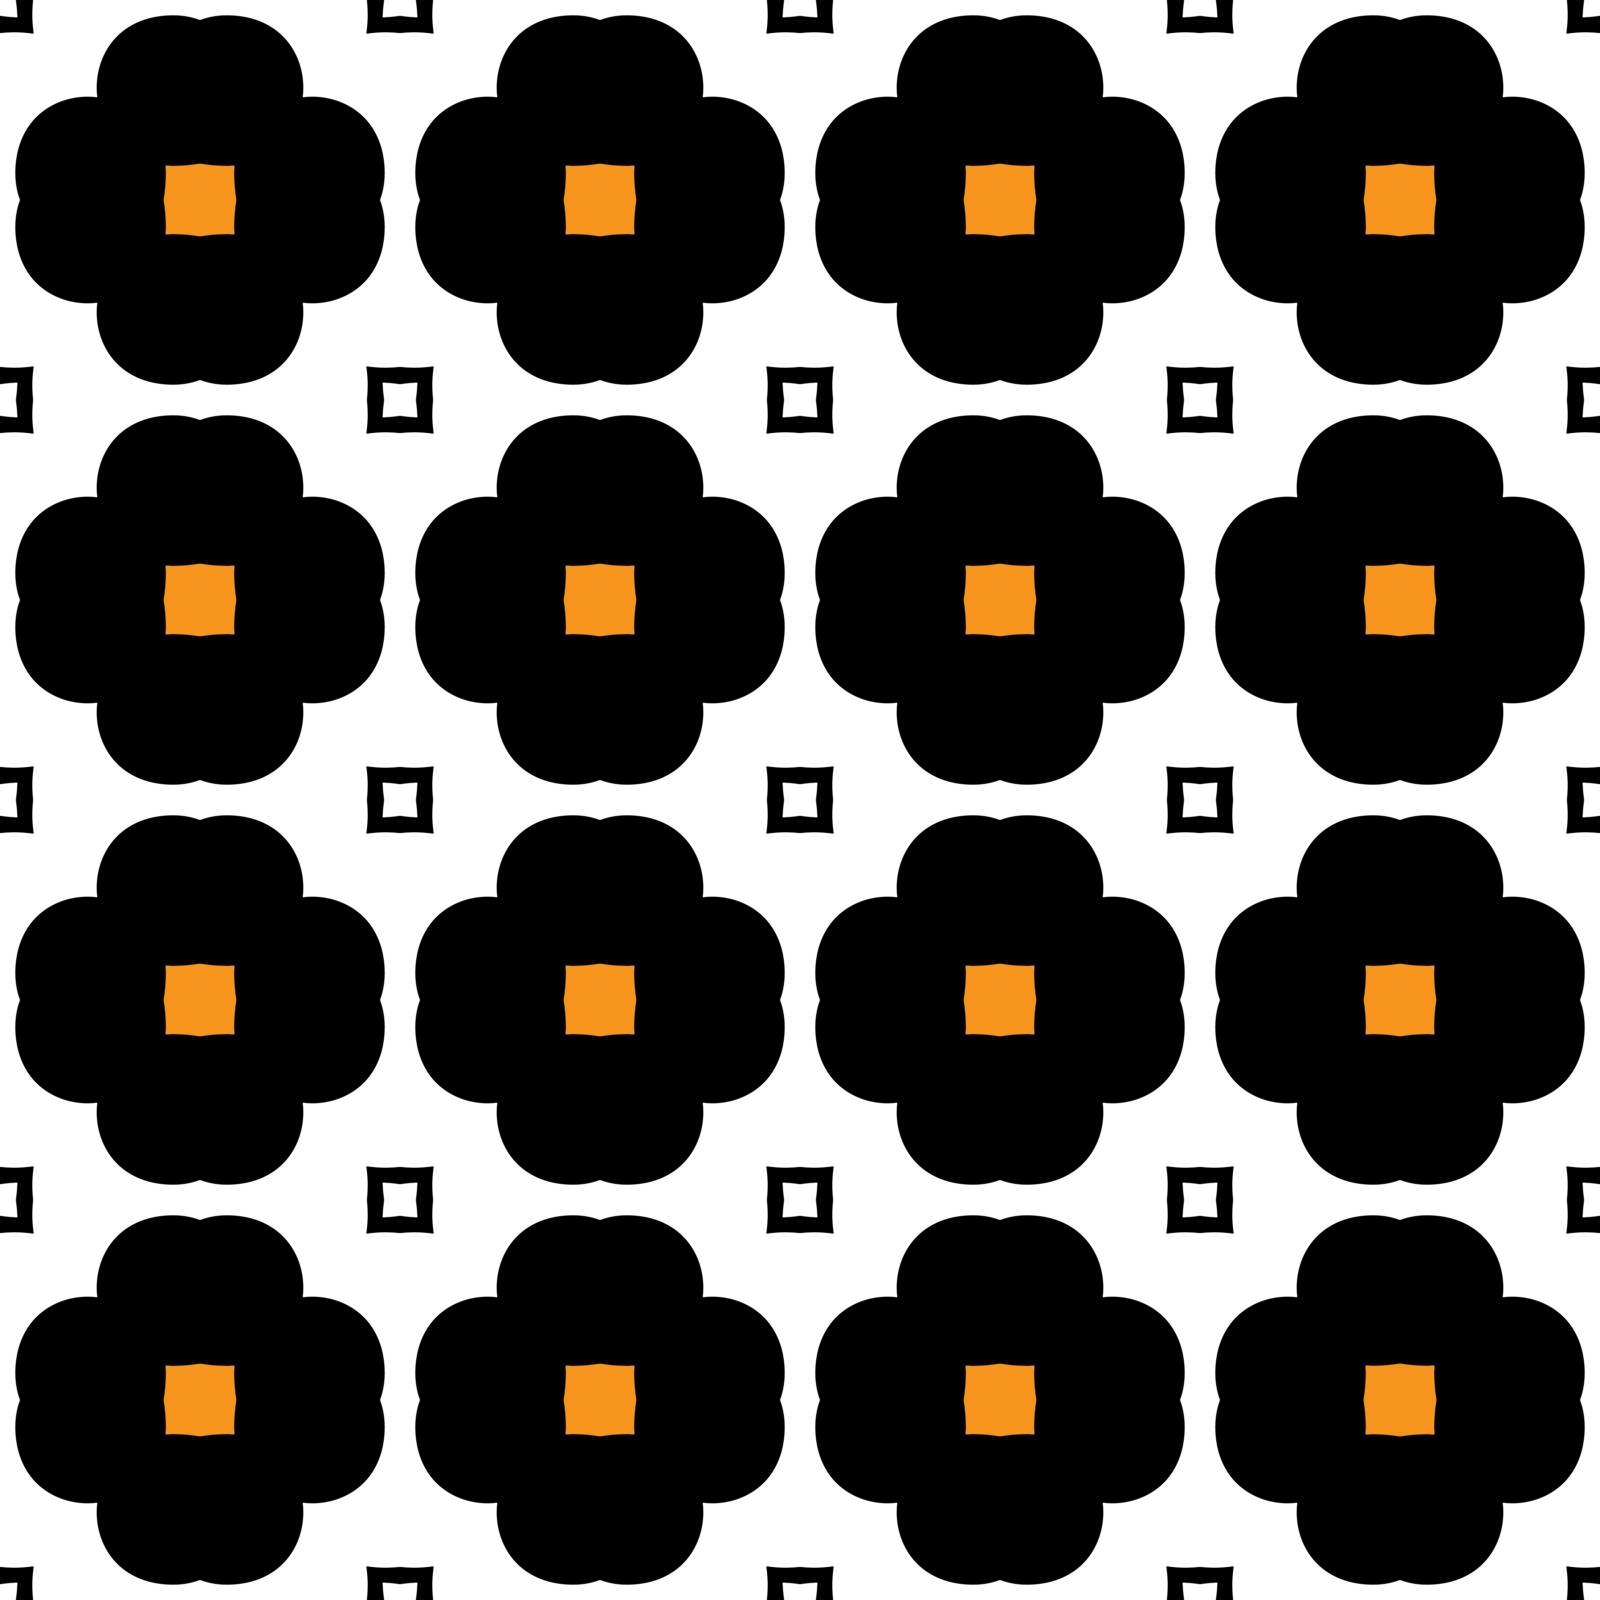 Seamless illustrated pattern made of abstract elements in orange, white and black